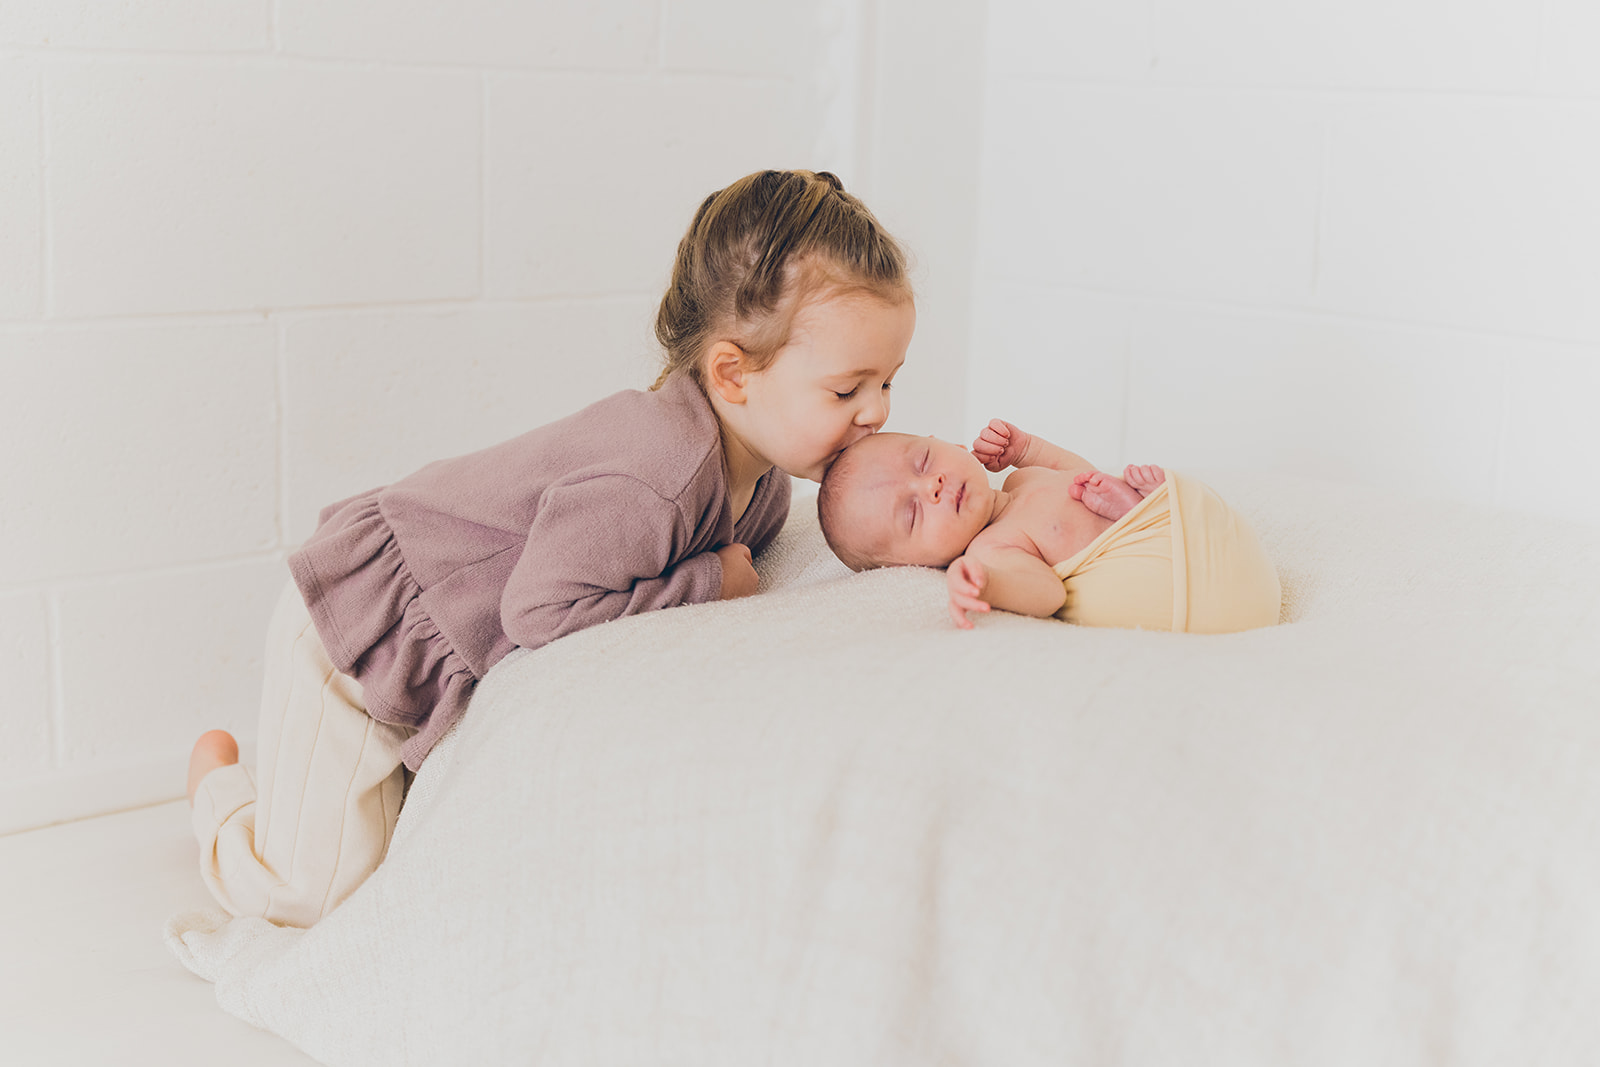 Three year old toddler giving her newborn baby sister a kiss at RinkaDink Studio Northern Ireland.